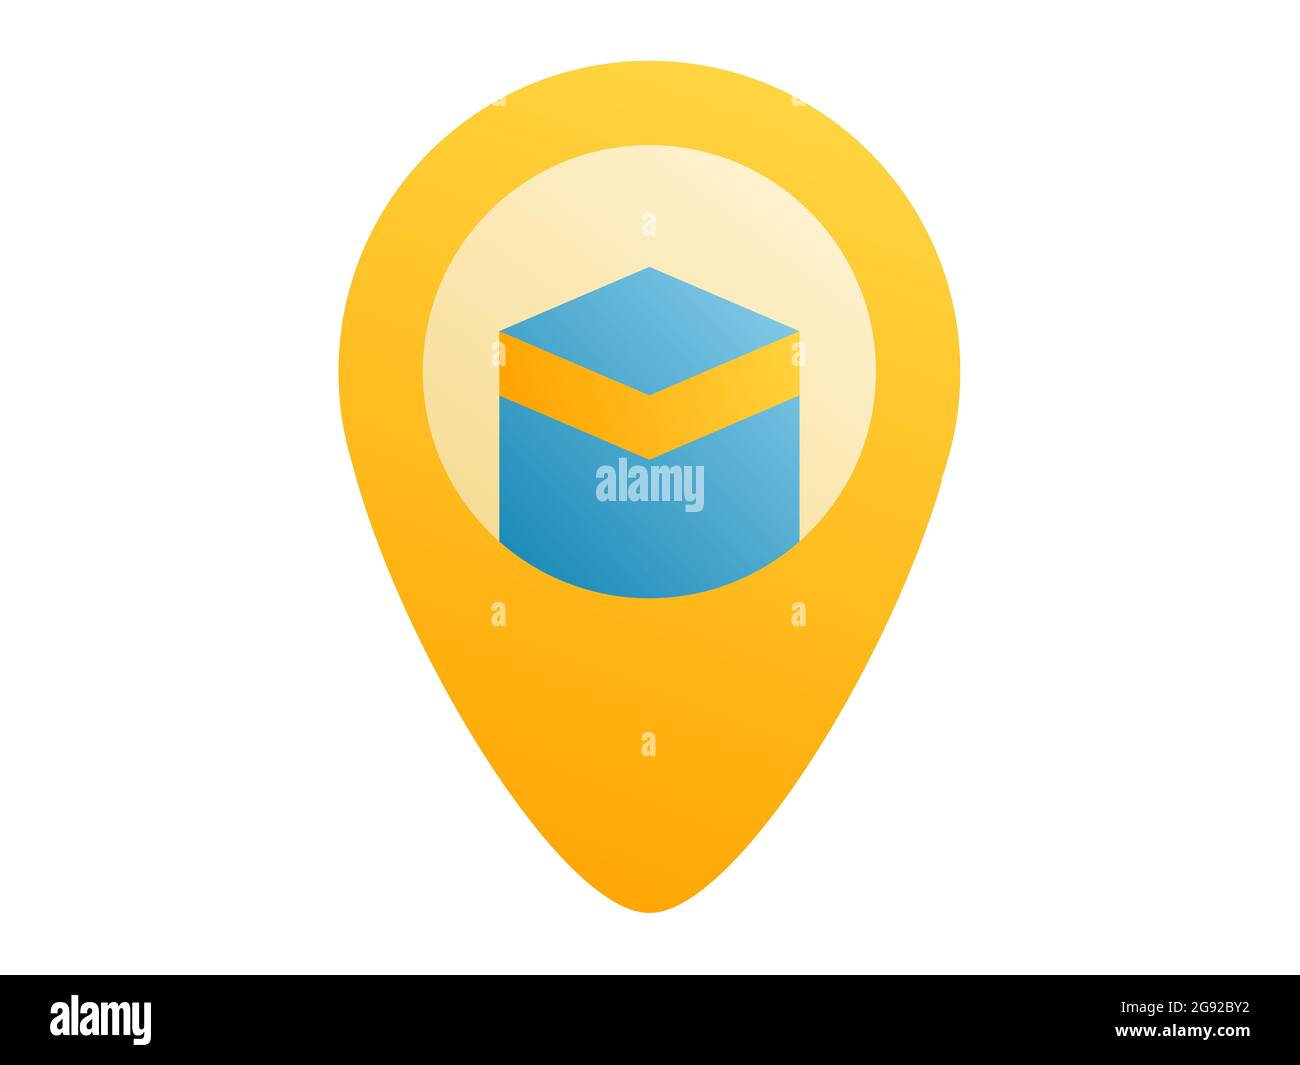 kaba mecca pin location single isolated icon with smooth style vector illustration Stock Photo